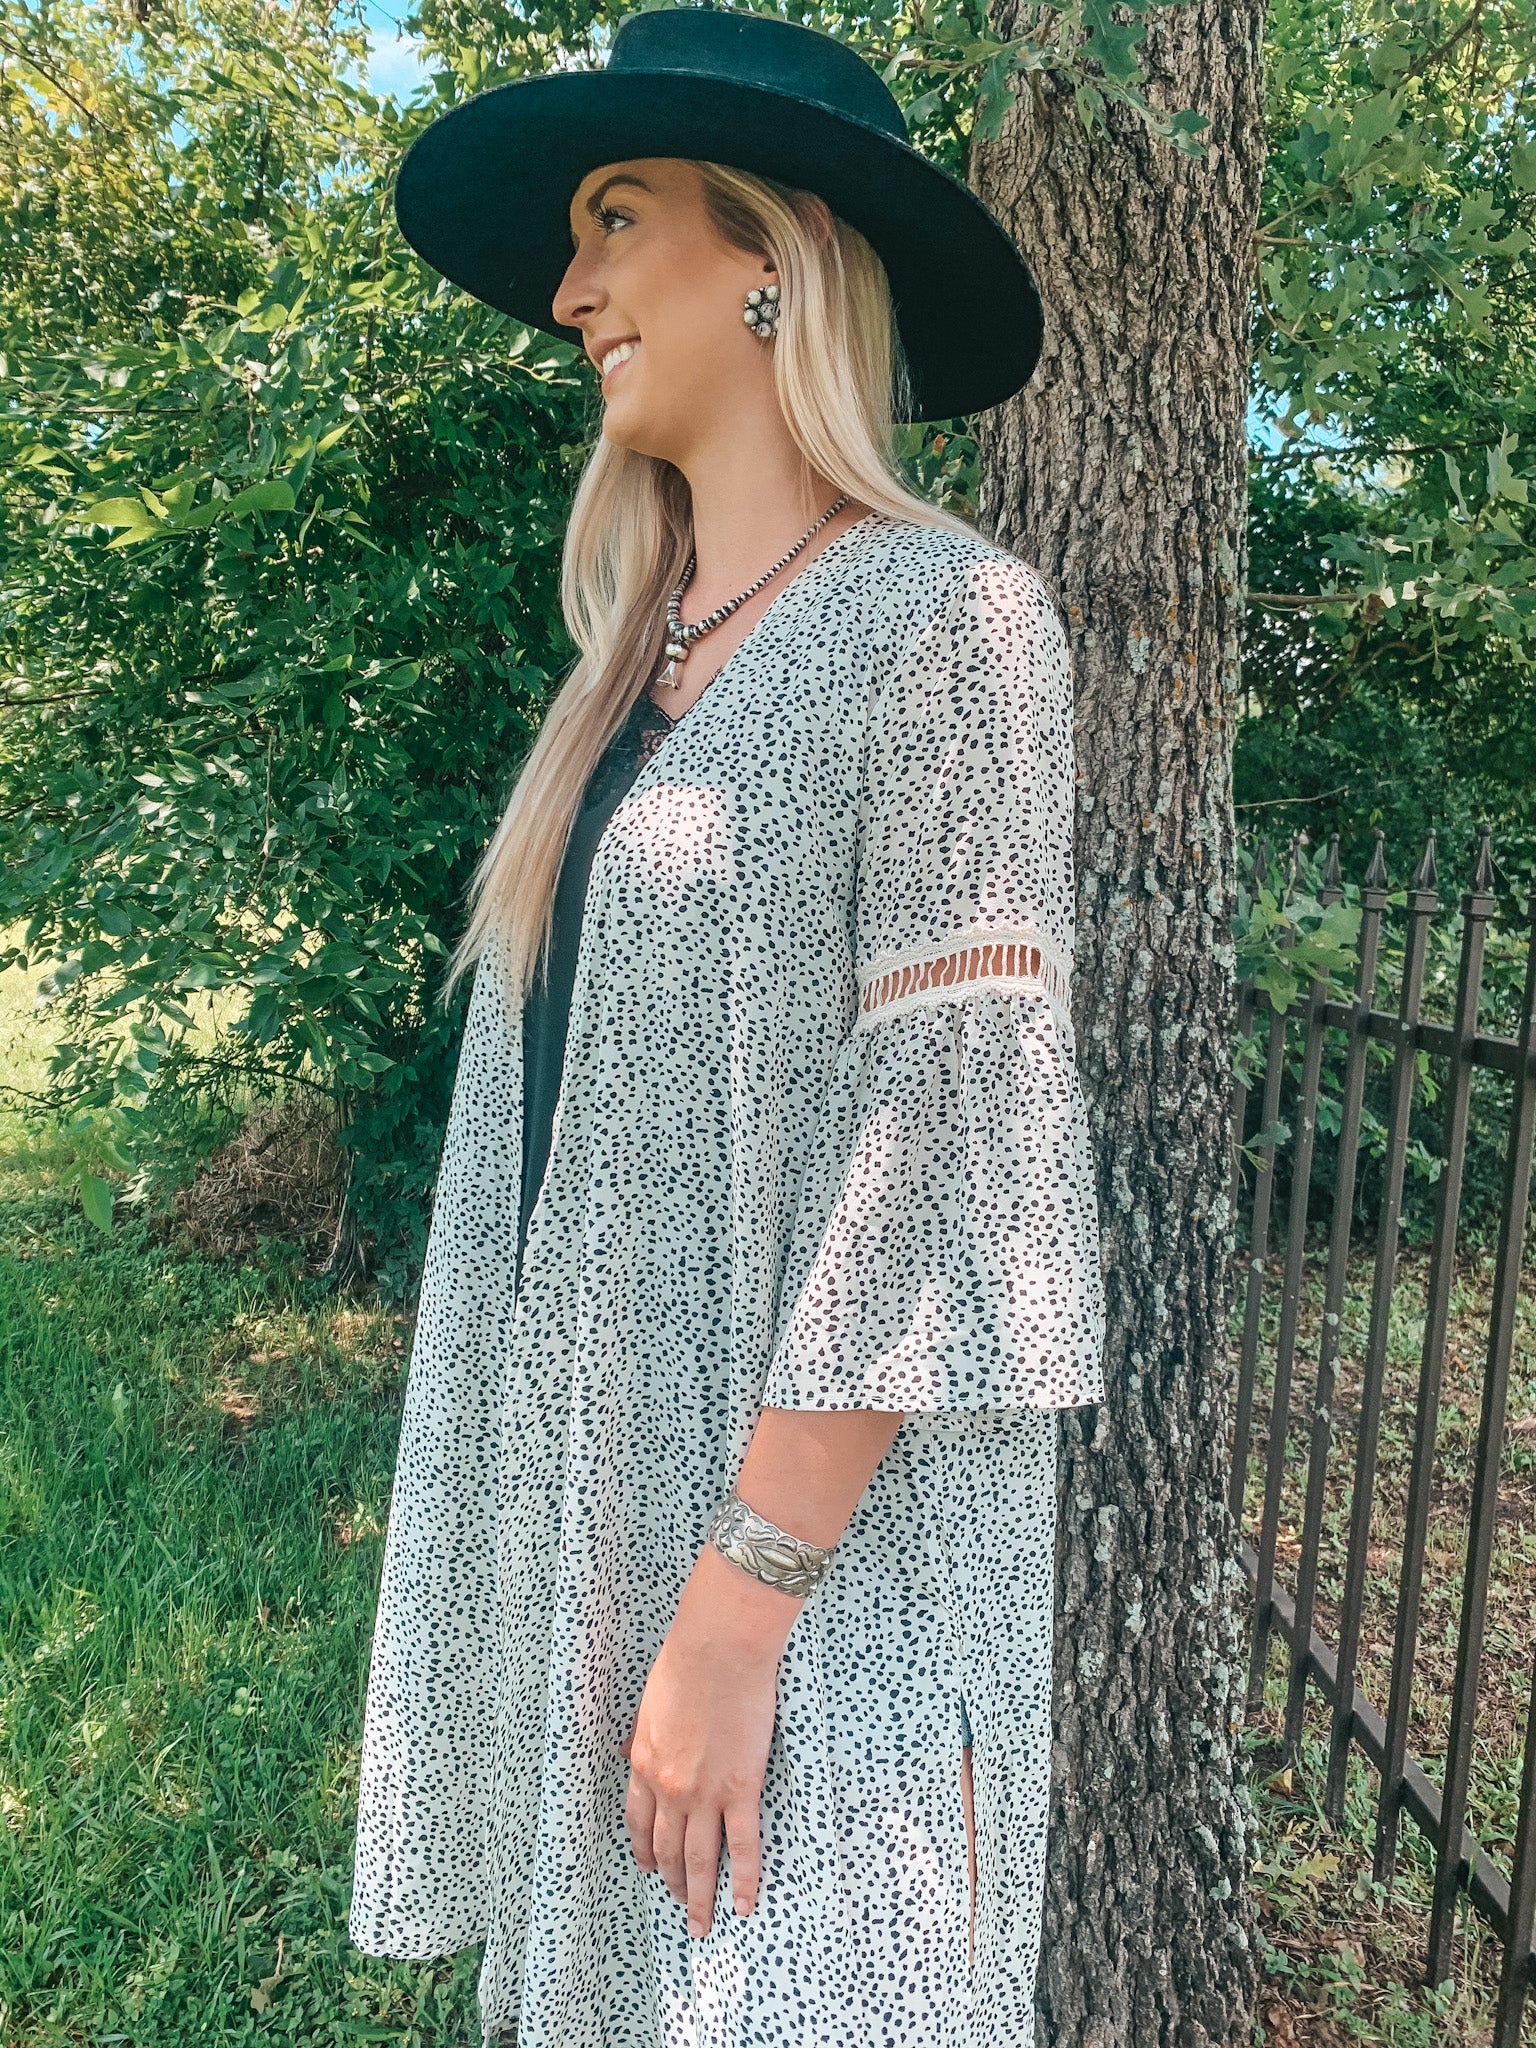 What The Heart Wants Bell Sleeve Kimono in Dalmatian Print - Giddy Up Glamour Boutique